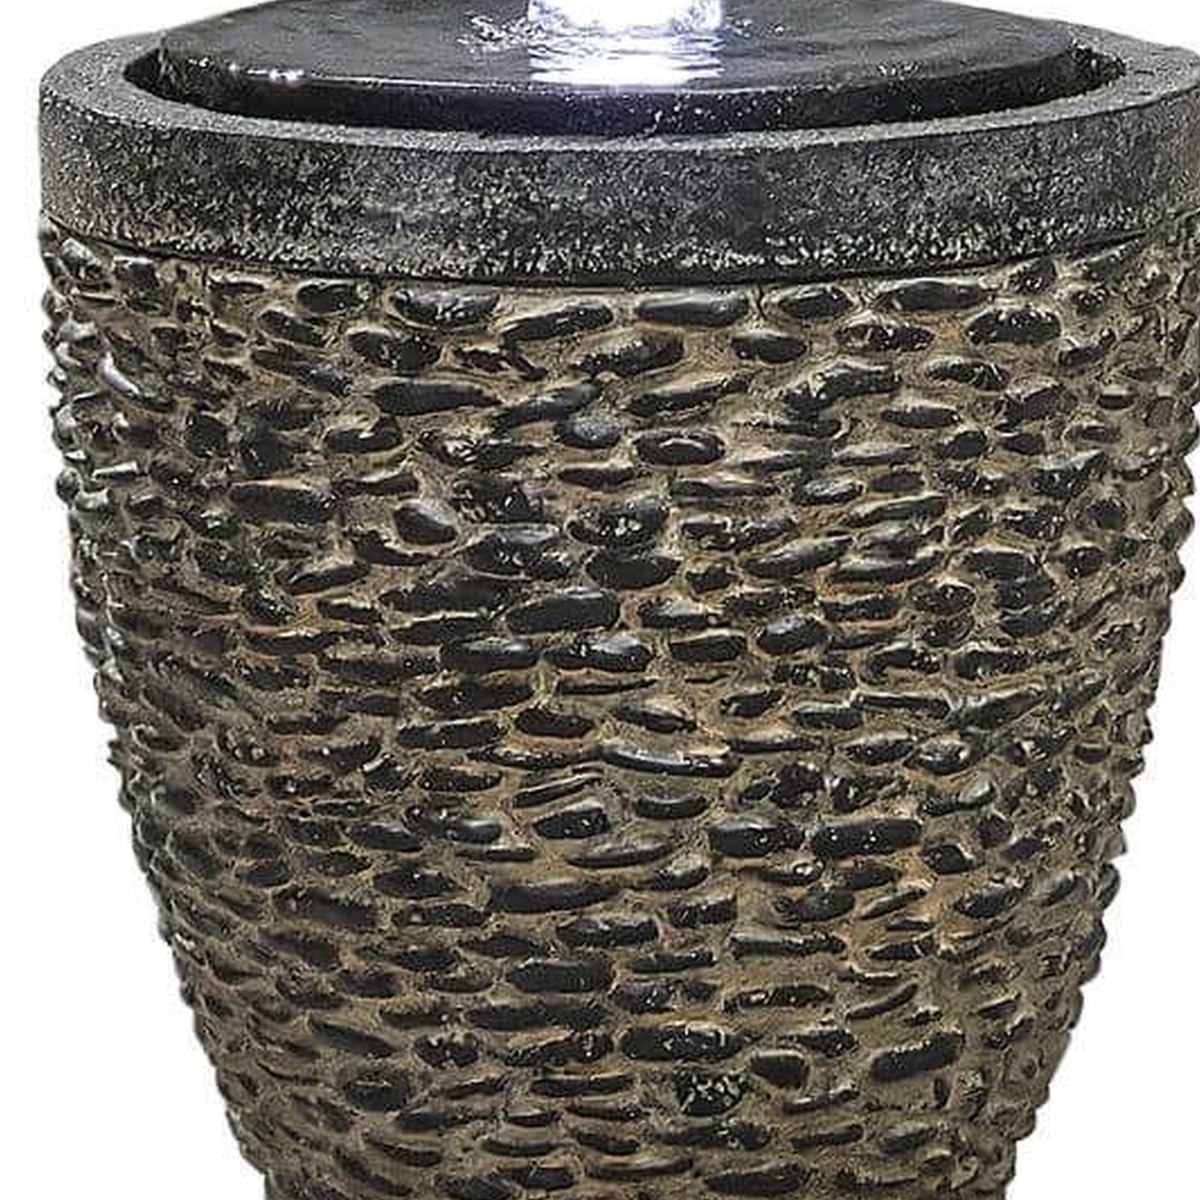 Pebble Stone Water Feature (with LEDs)